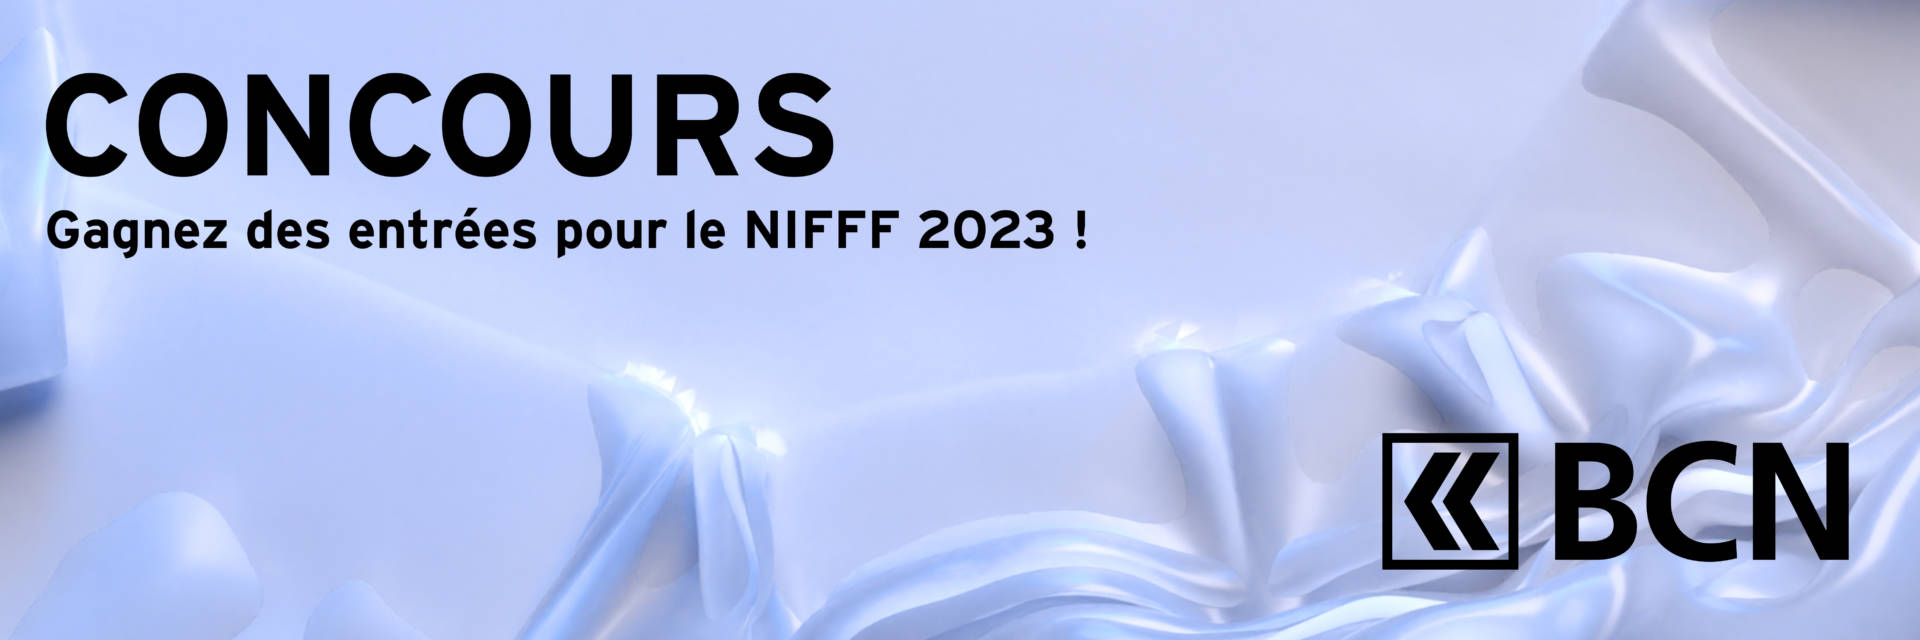 Concours BCN © NIFFF 2023